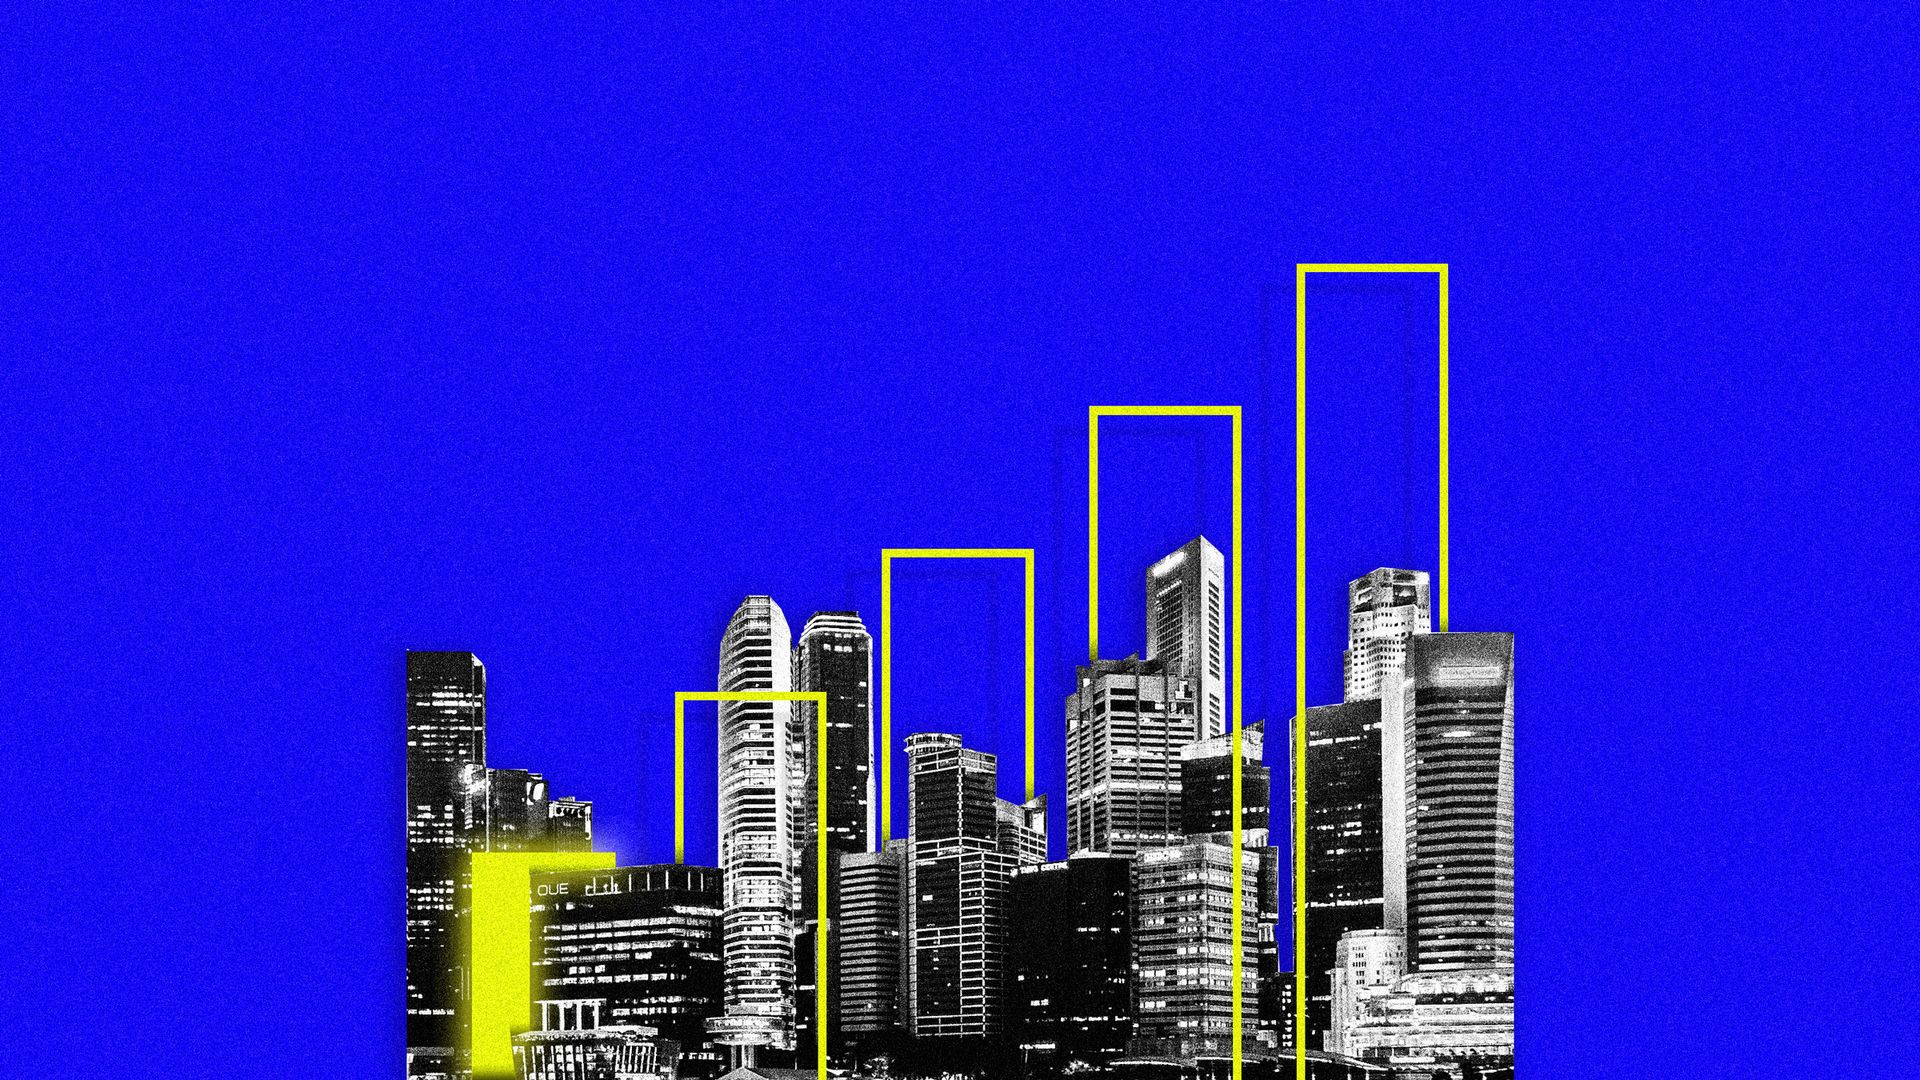 An illustration of a city overlaid with cell bar indicators